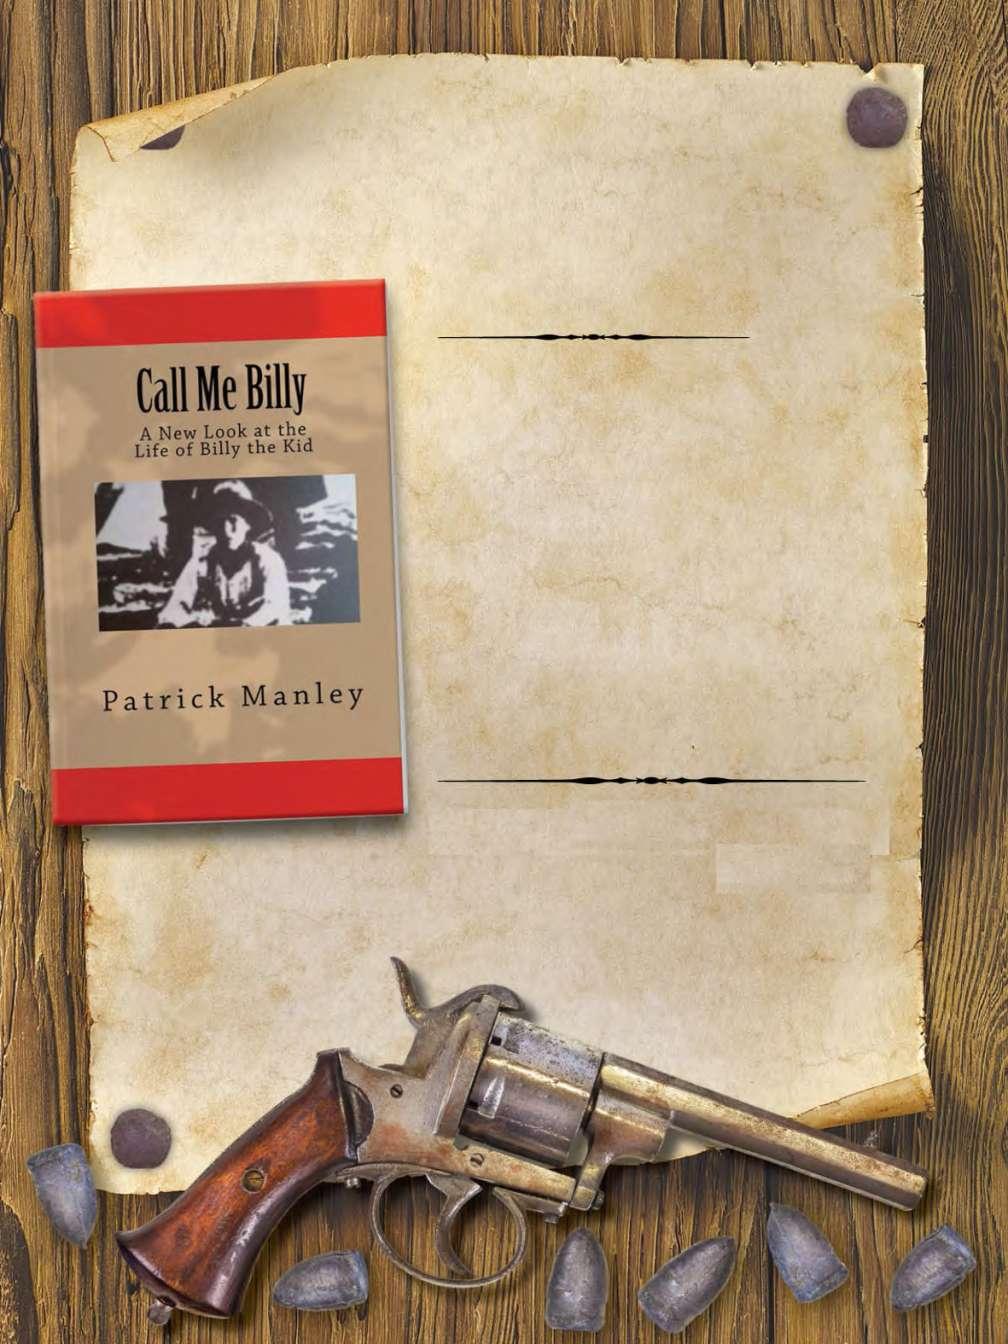 Call Me Billy By Patrick Manley JULY 14,1881: BILLY THE KID is shot dead at Fort Sumner under suspicious circumstances. Who was William H. Bonney?